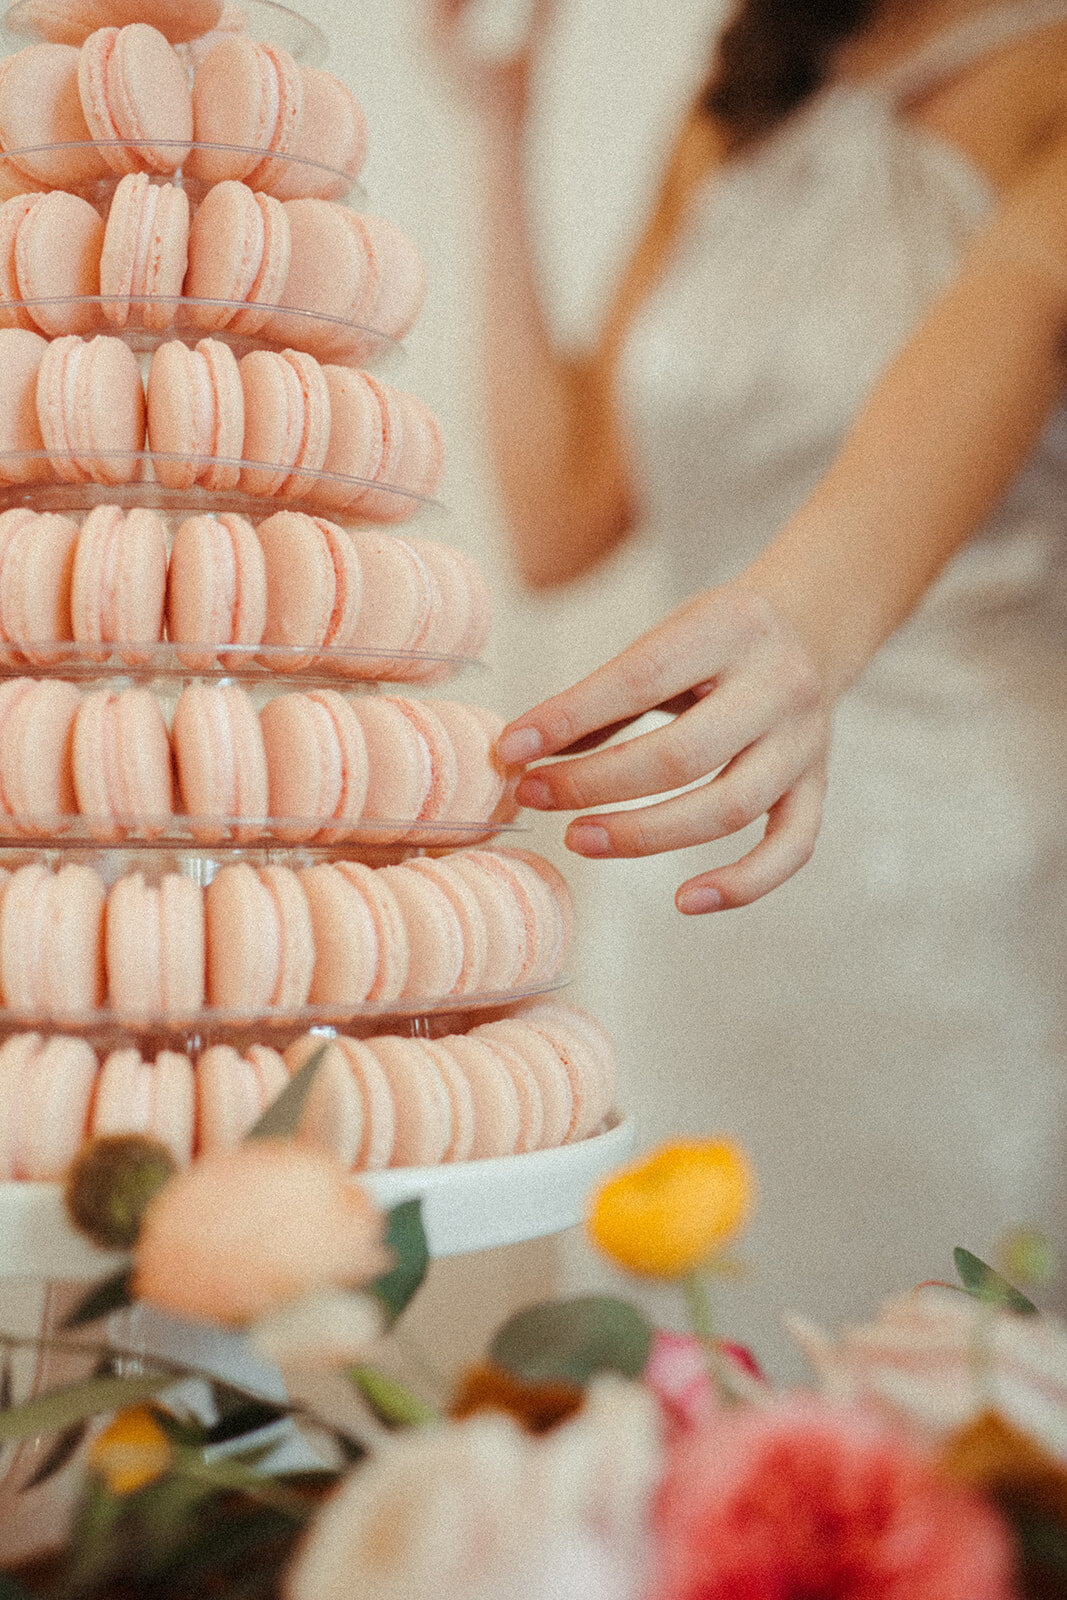 A close-up of the bride reaching into a tower of peach-colored macaroons setting on a cake stand next to flower arrangement.